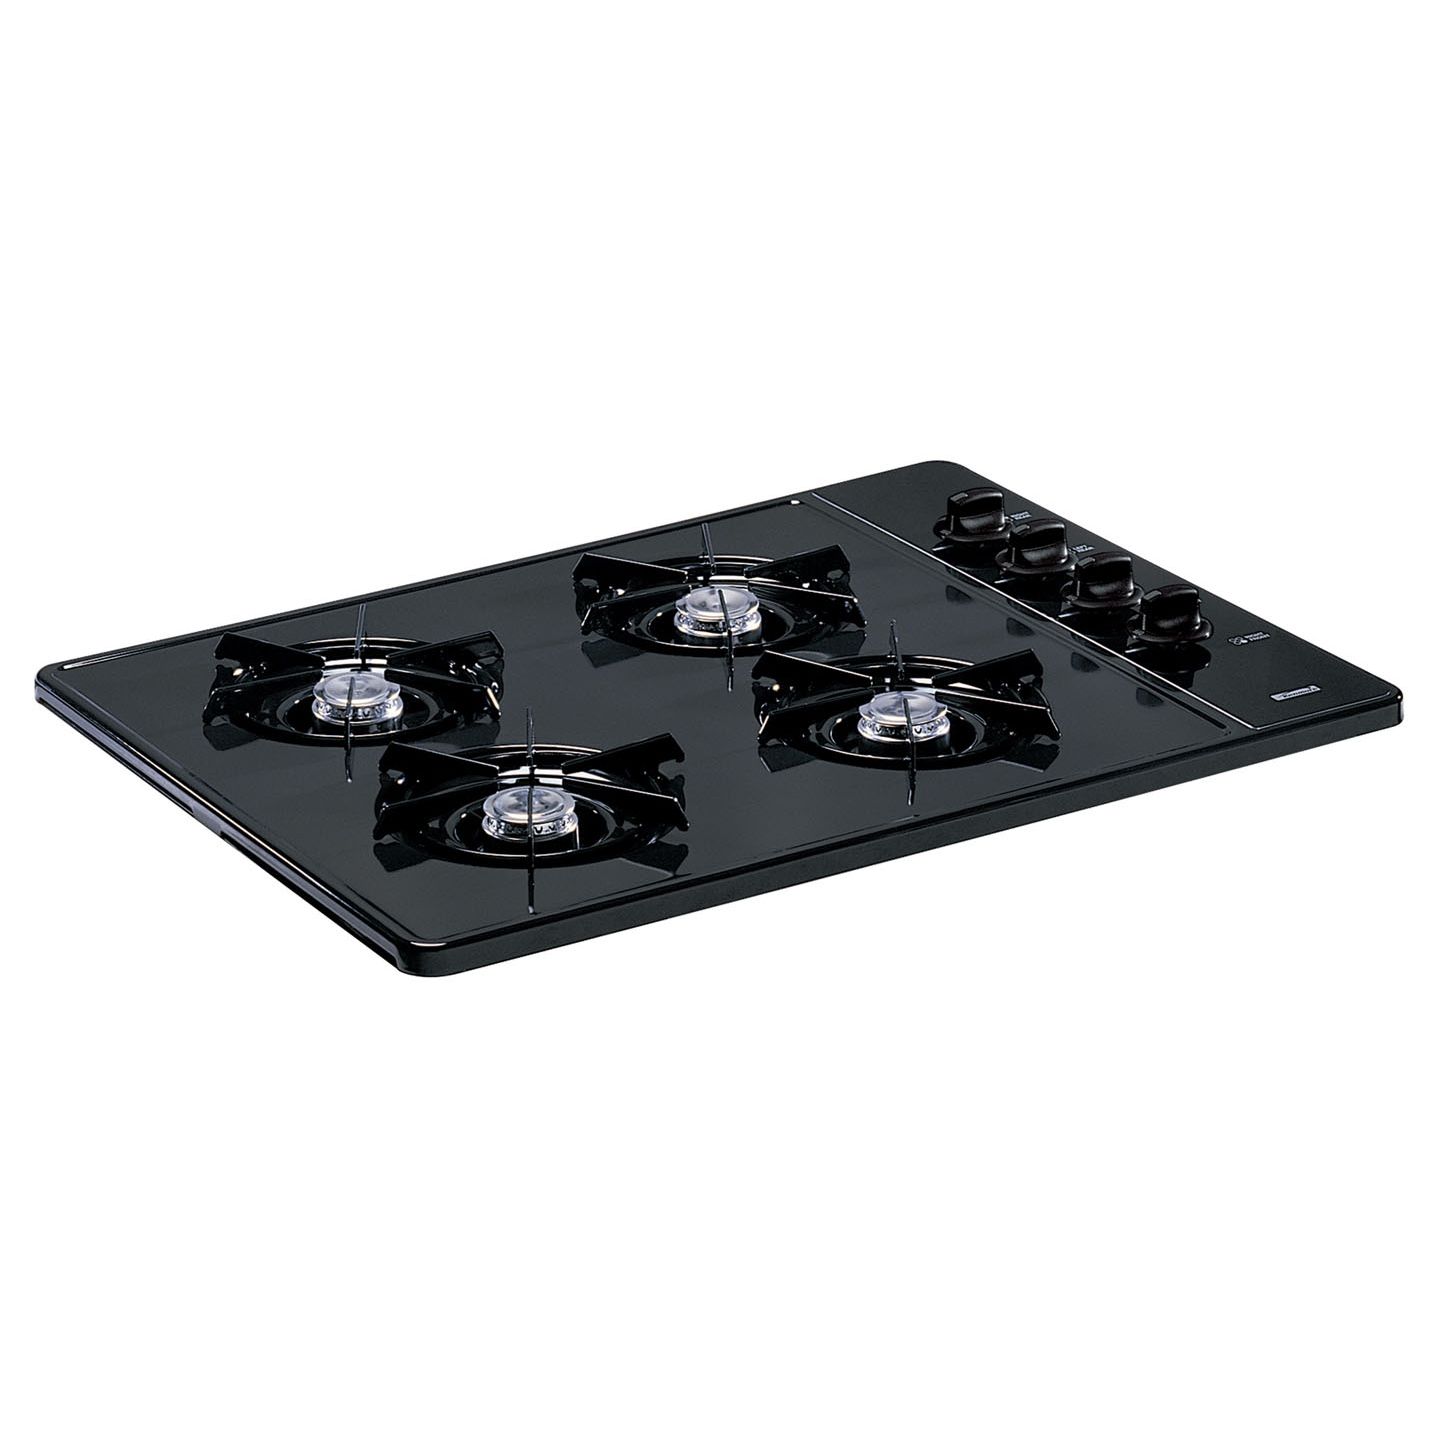 Kenmore Stove Coil Top Stainless Black (Convection Oven) — Mesquite Group